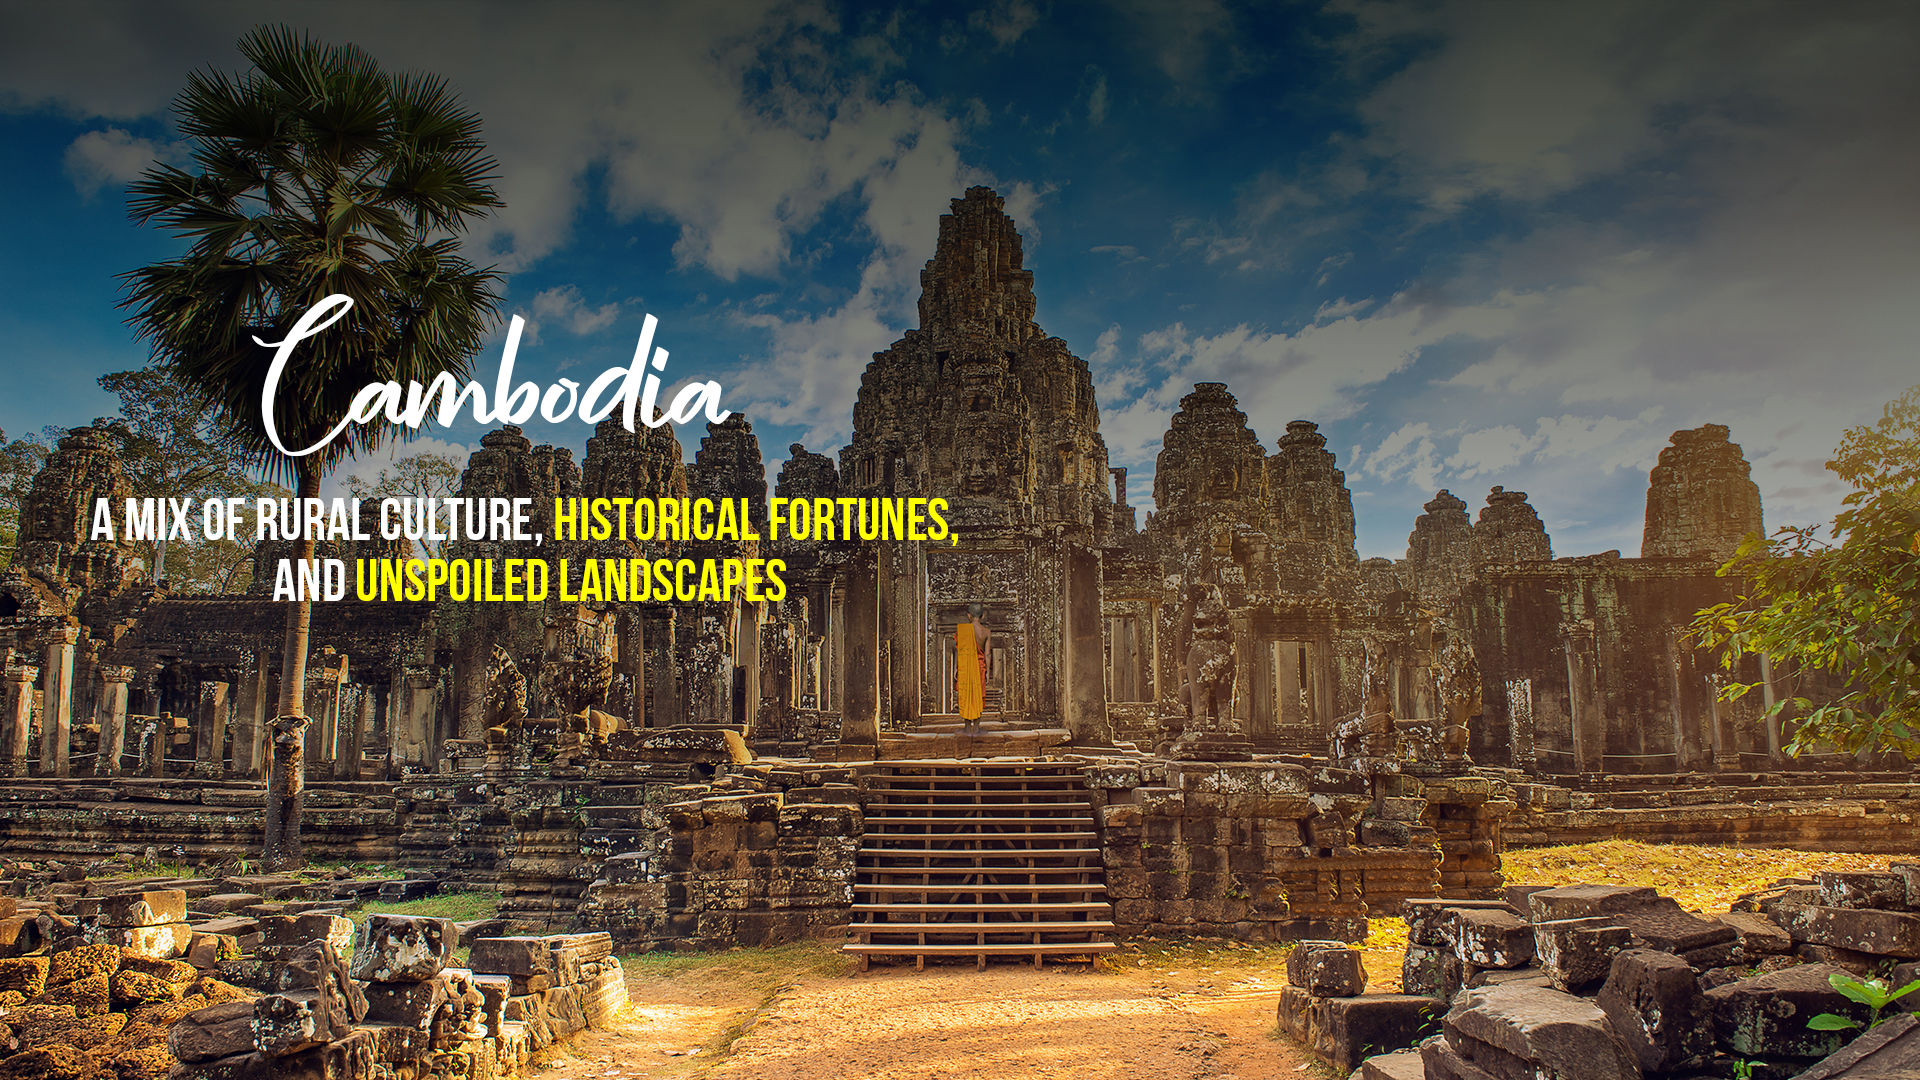 tour packages to cambodia from india